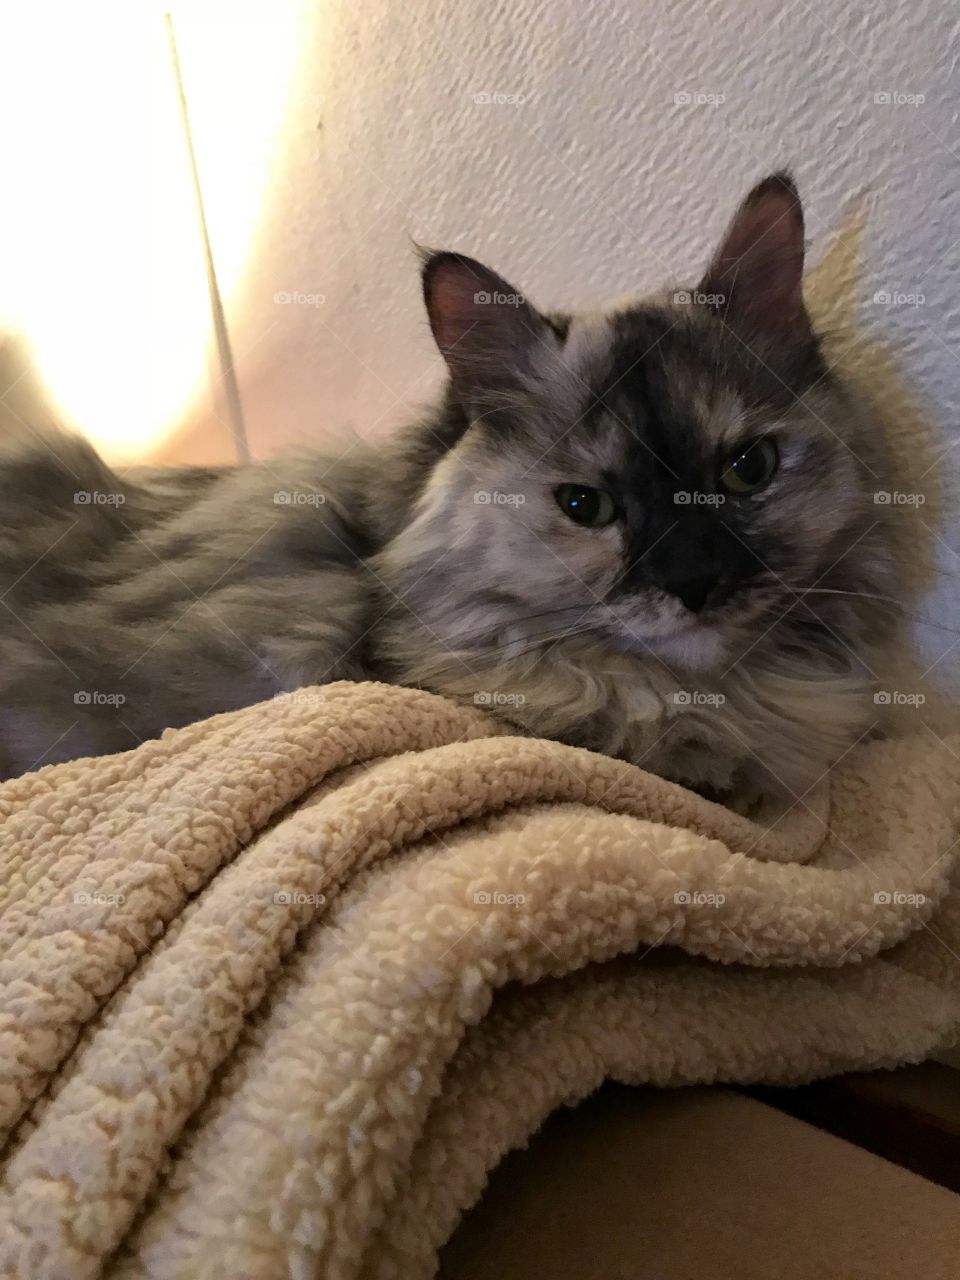 Layla the cat with bed head 